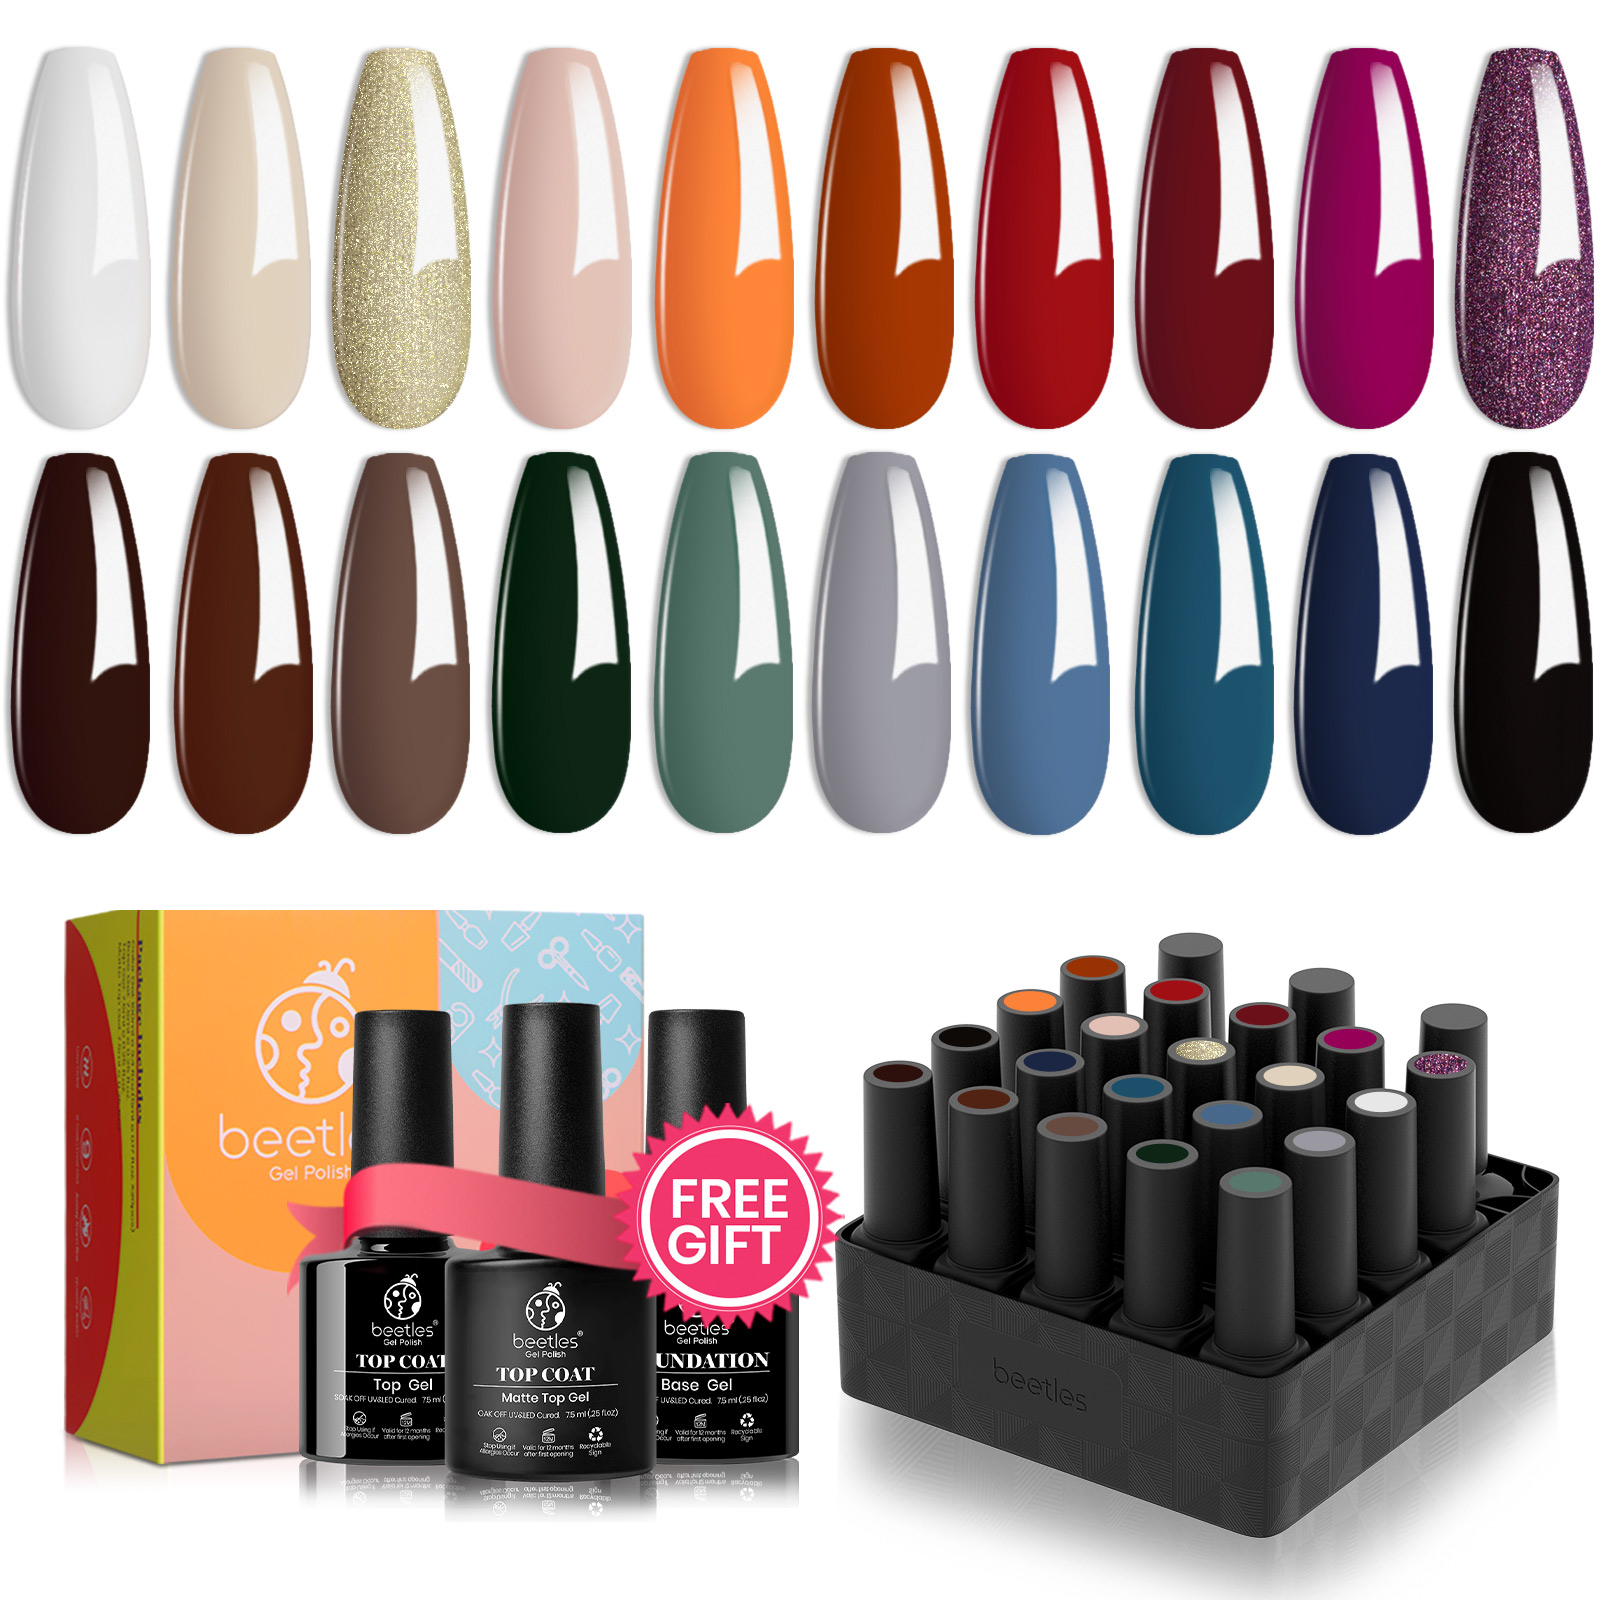 Glowing Attraction | Gel Polish 20 Colors Set